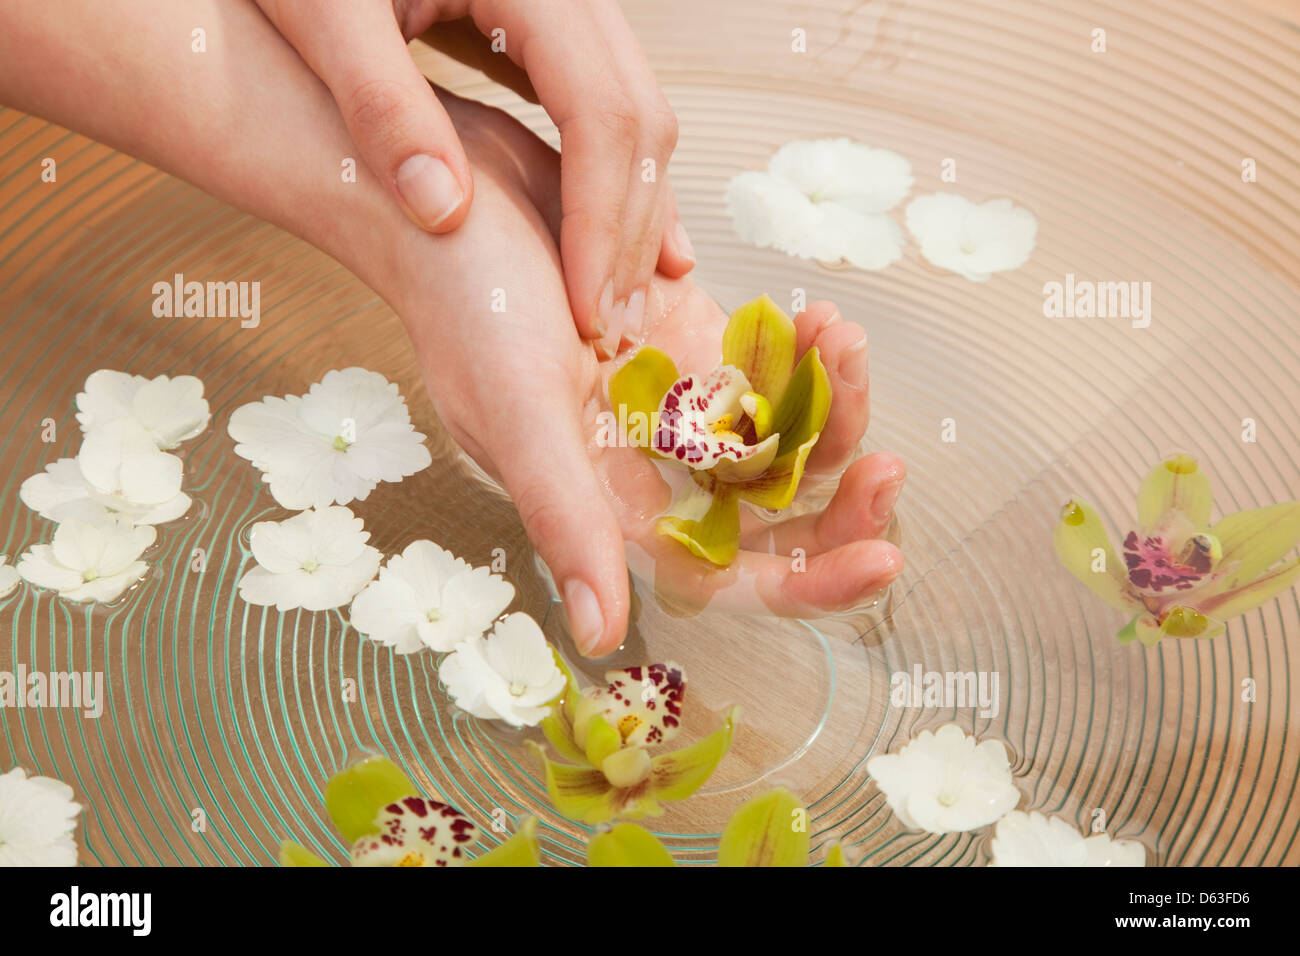 Hands in bowl with clean water and flowers Stock Photo